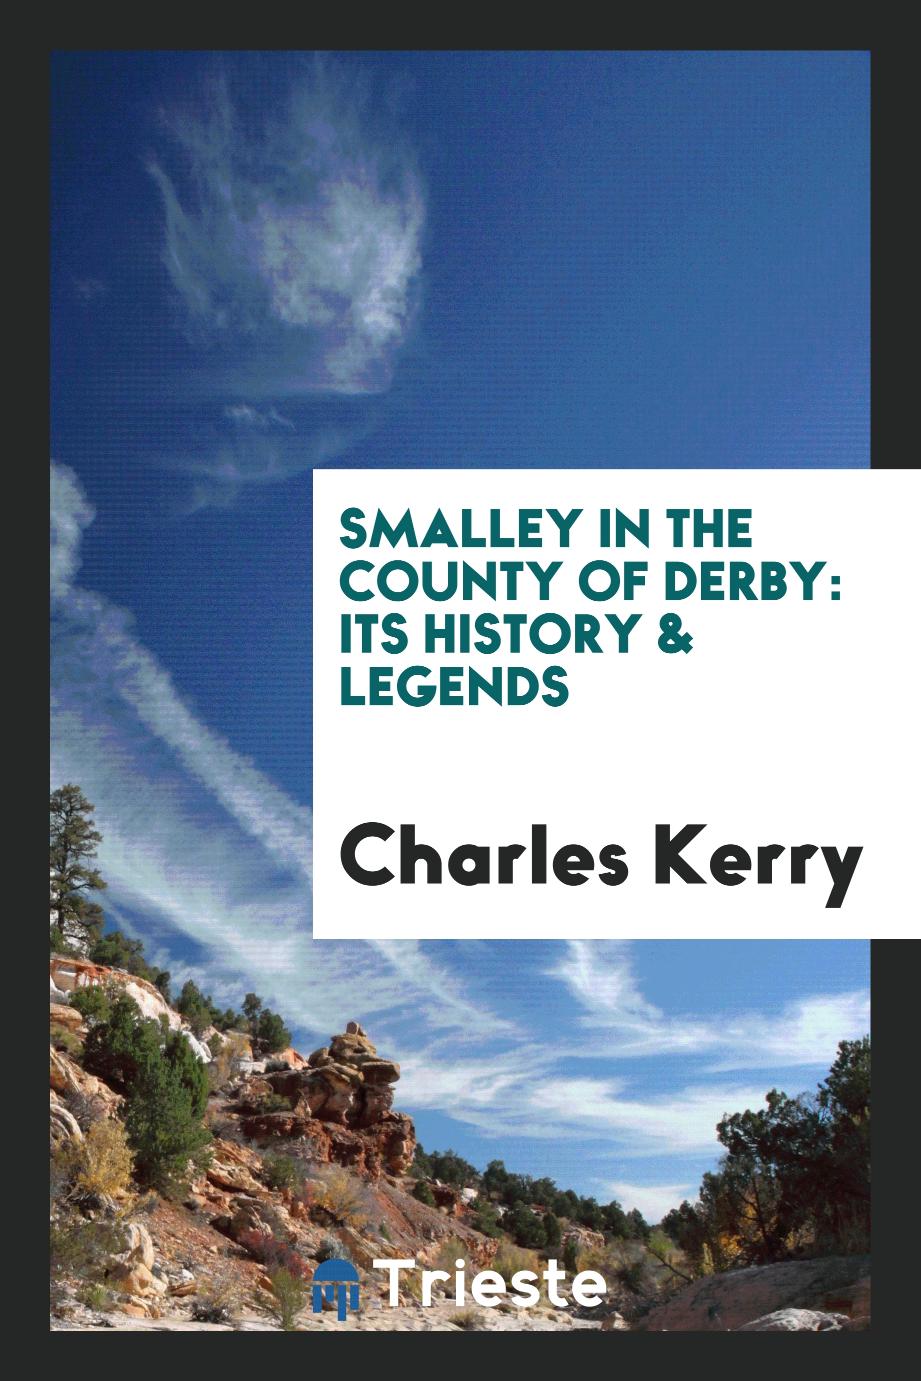 Smalley in the County of Derby: Its History & Legends